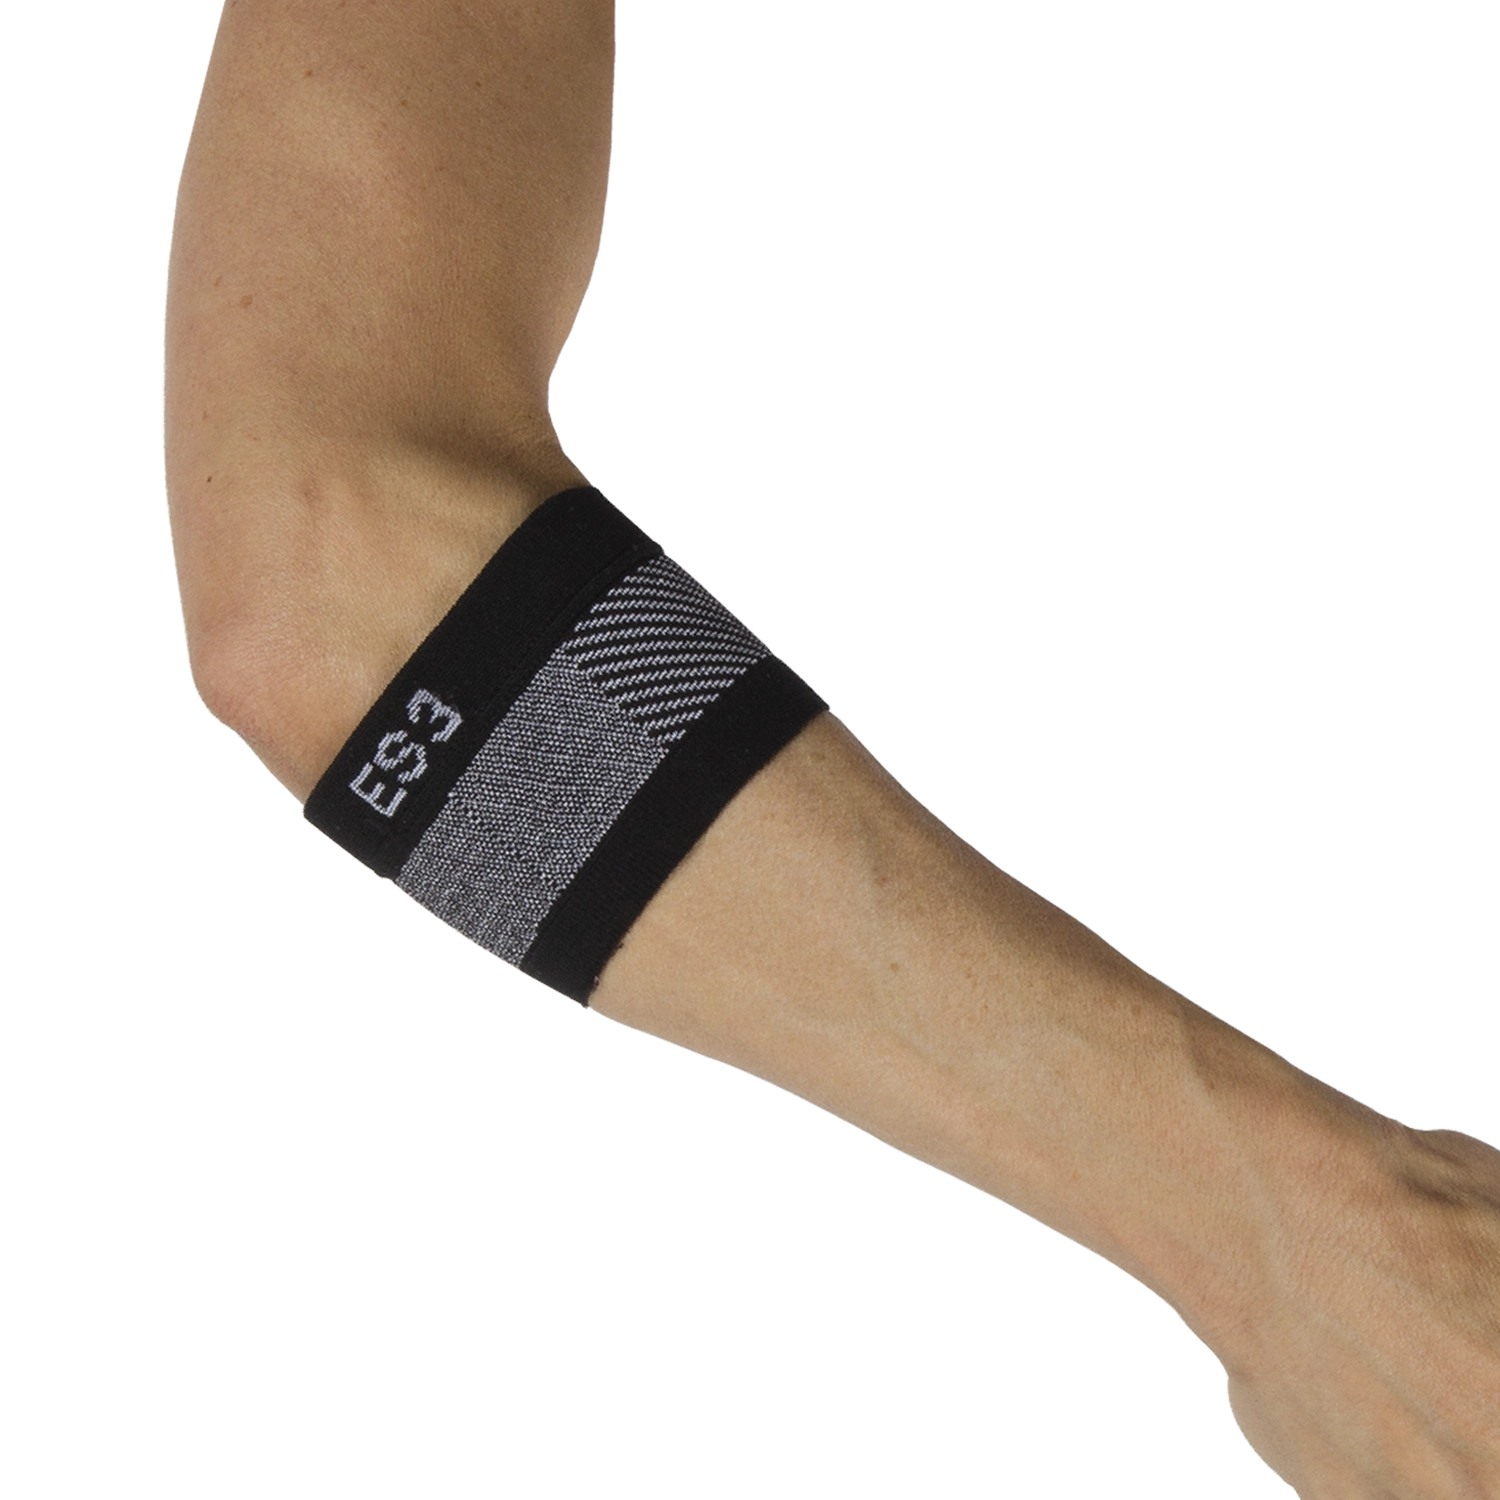 UFlex Athletics Elbow Compression Sleeve Support and Brace by for